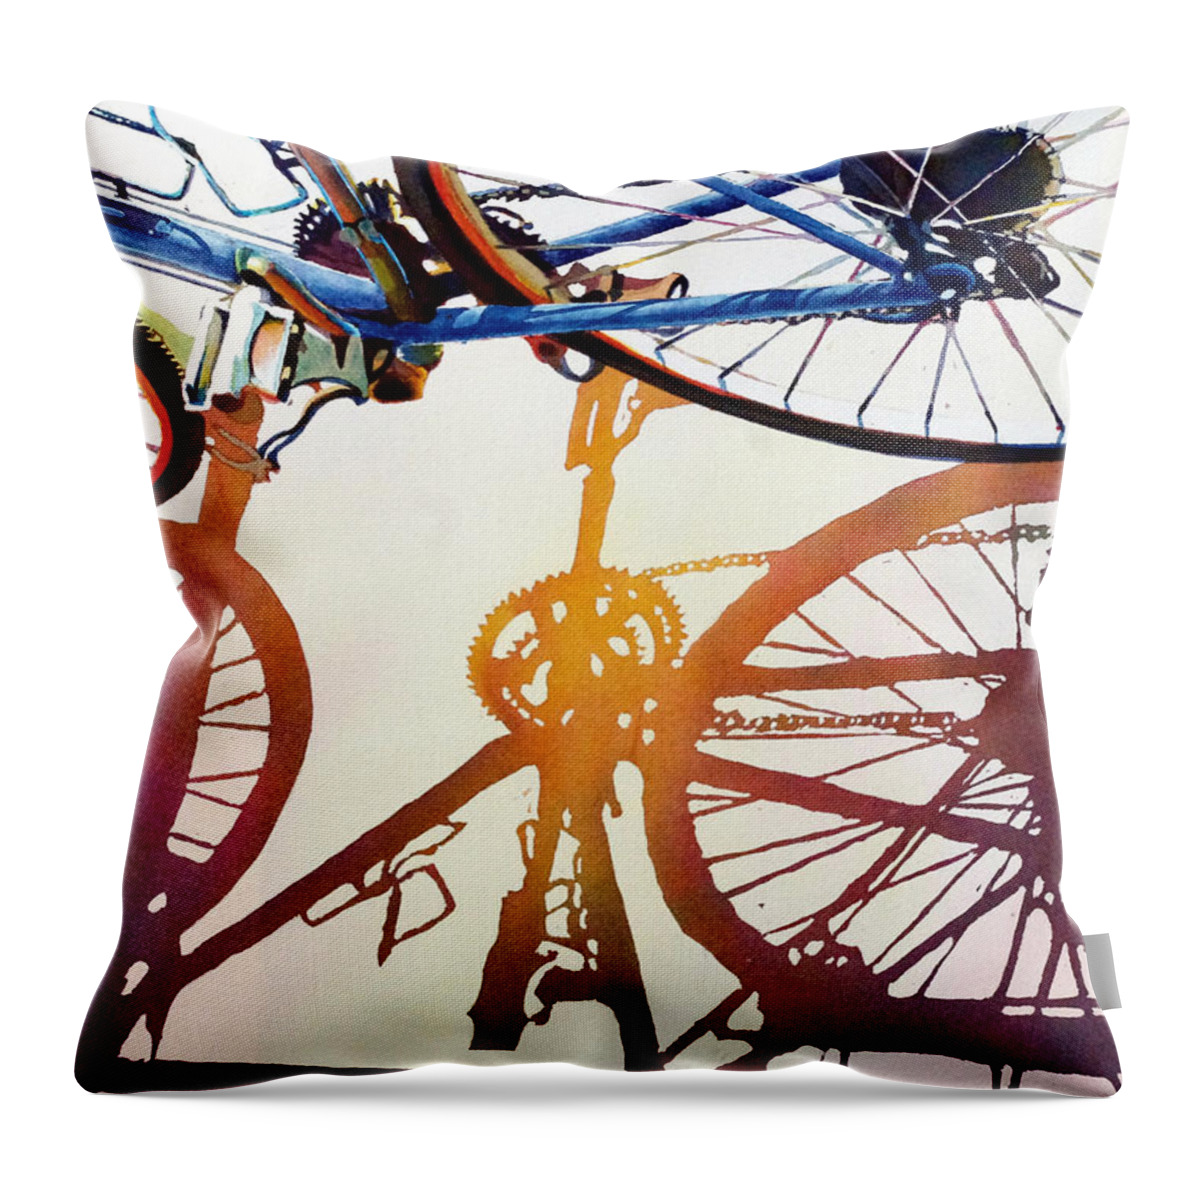 Blue Bicycle Throw Pillow featuring the painting Blue Bike by Greg and Linda Halom